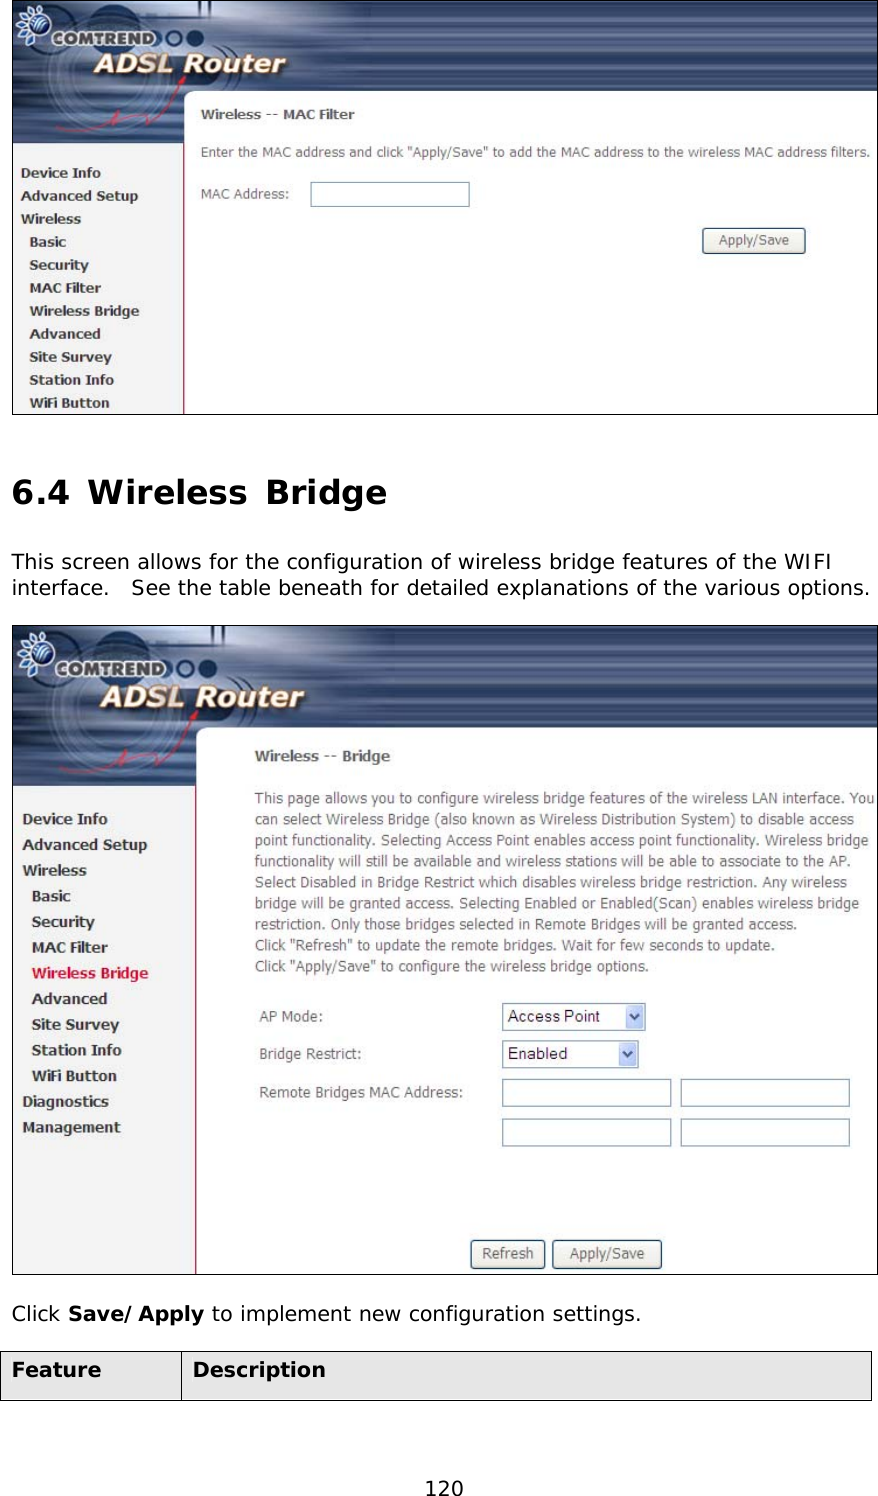  120  6.4 Wireless Bridge This screen allows for the configuration of wireless bridge features of the WIFI interface.  See the table beneath for detailed explanations of the various options.    Click Save/Apply to implement new configuration settings.   Feature  Description 